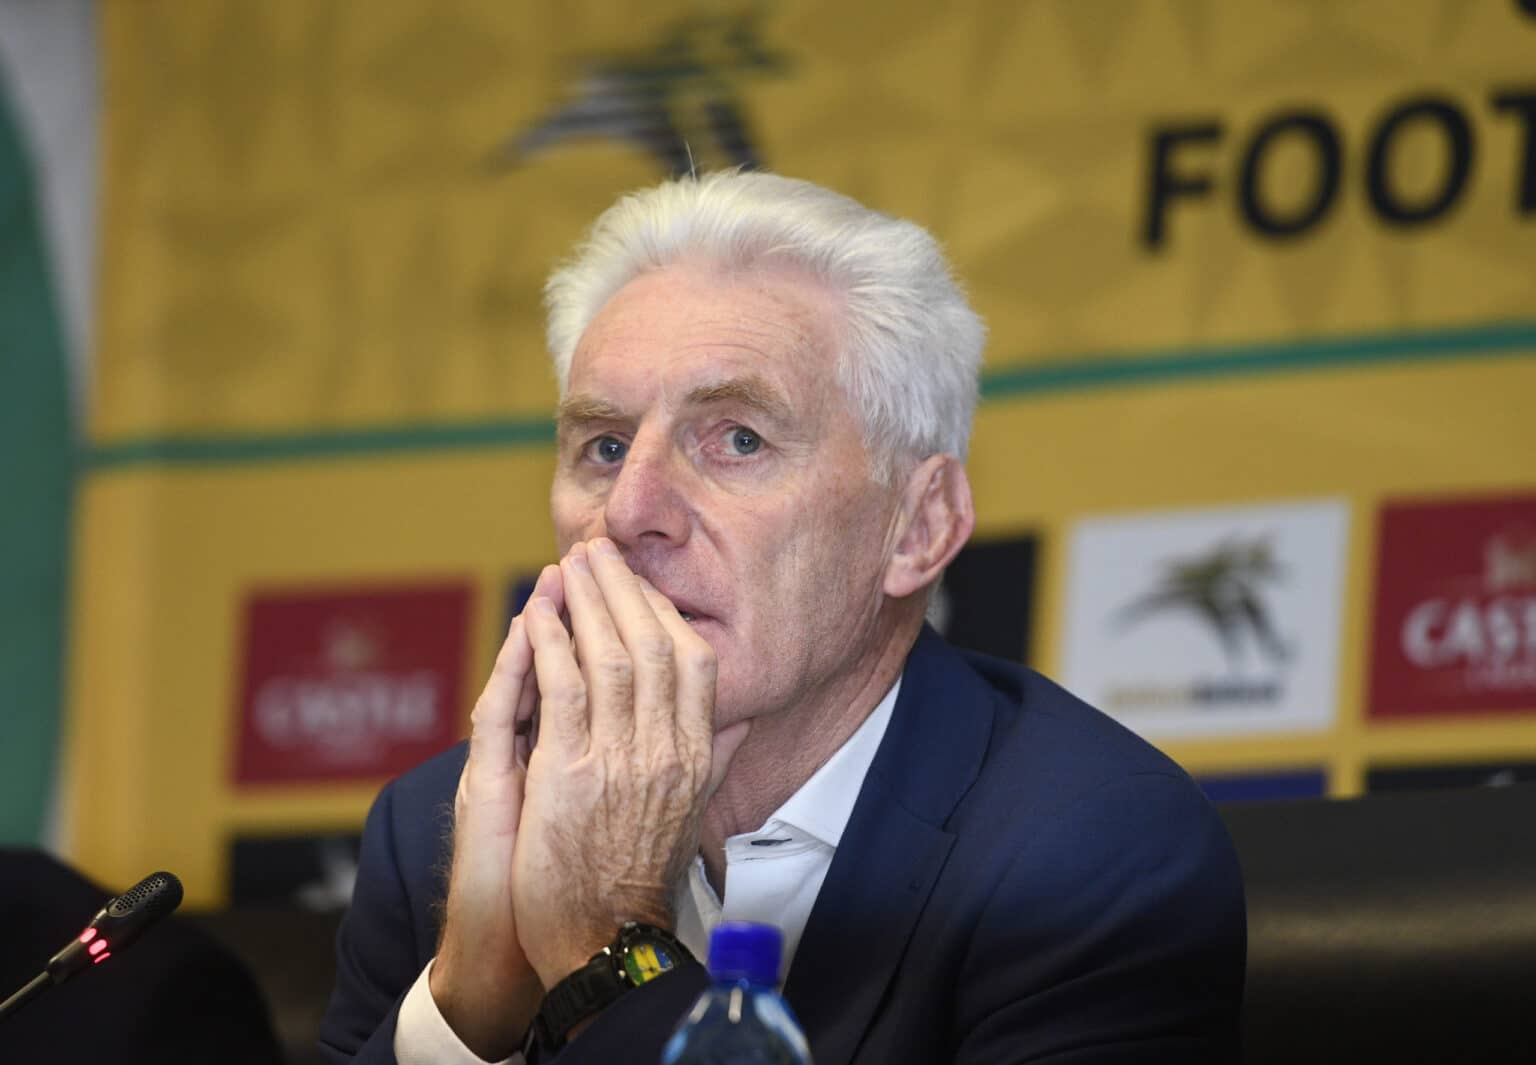 South Africa coach Hugo Broos names provisional 34-man squad for Ethiopia qualifier